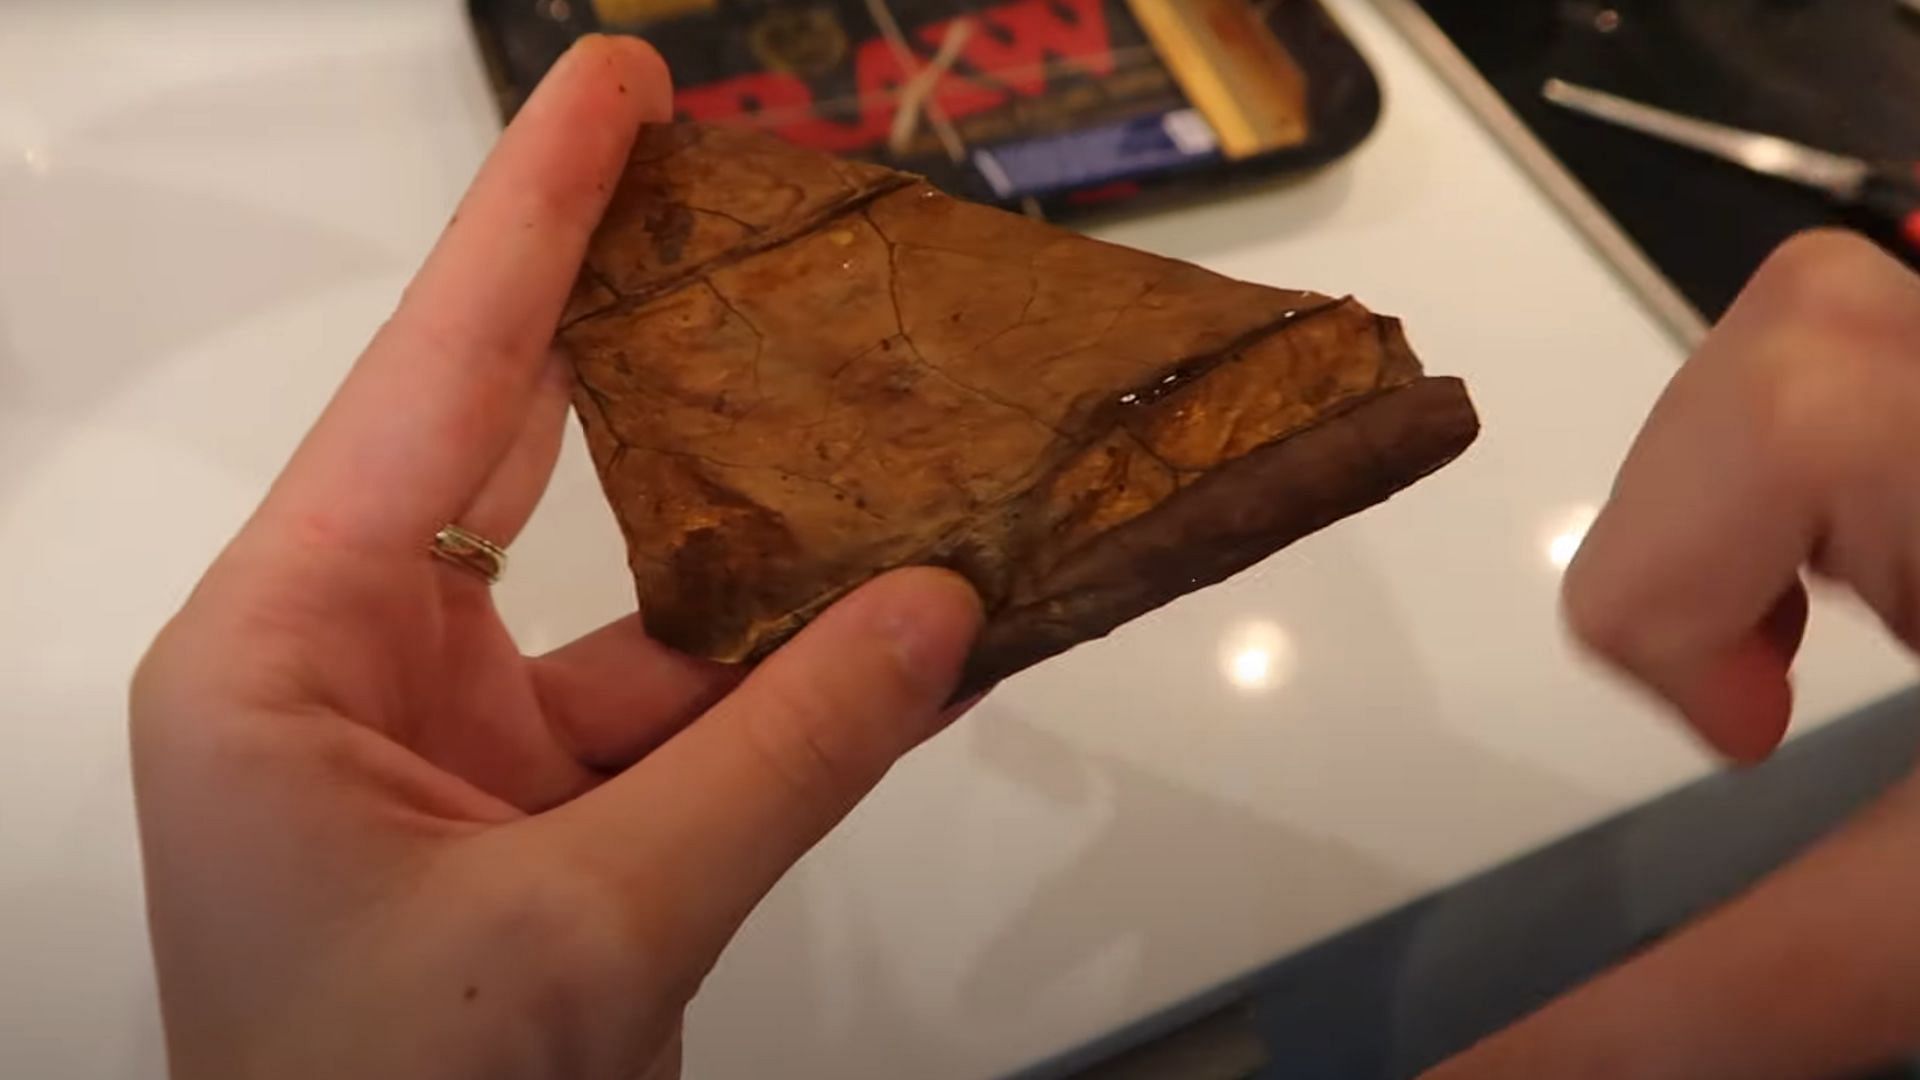 How to Roll a Backwoods Blunt Like a Pro